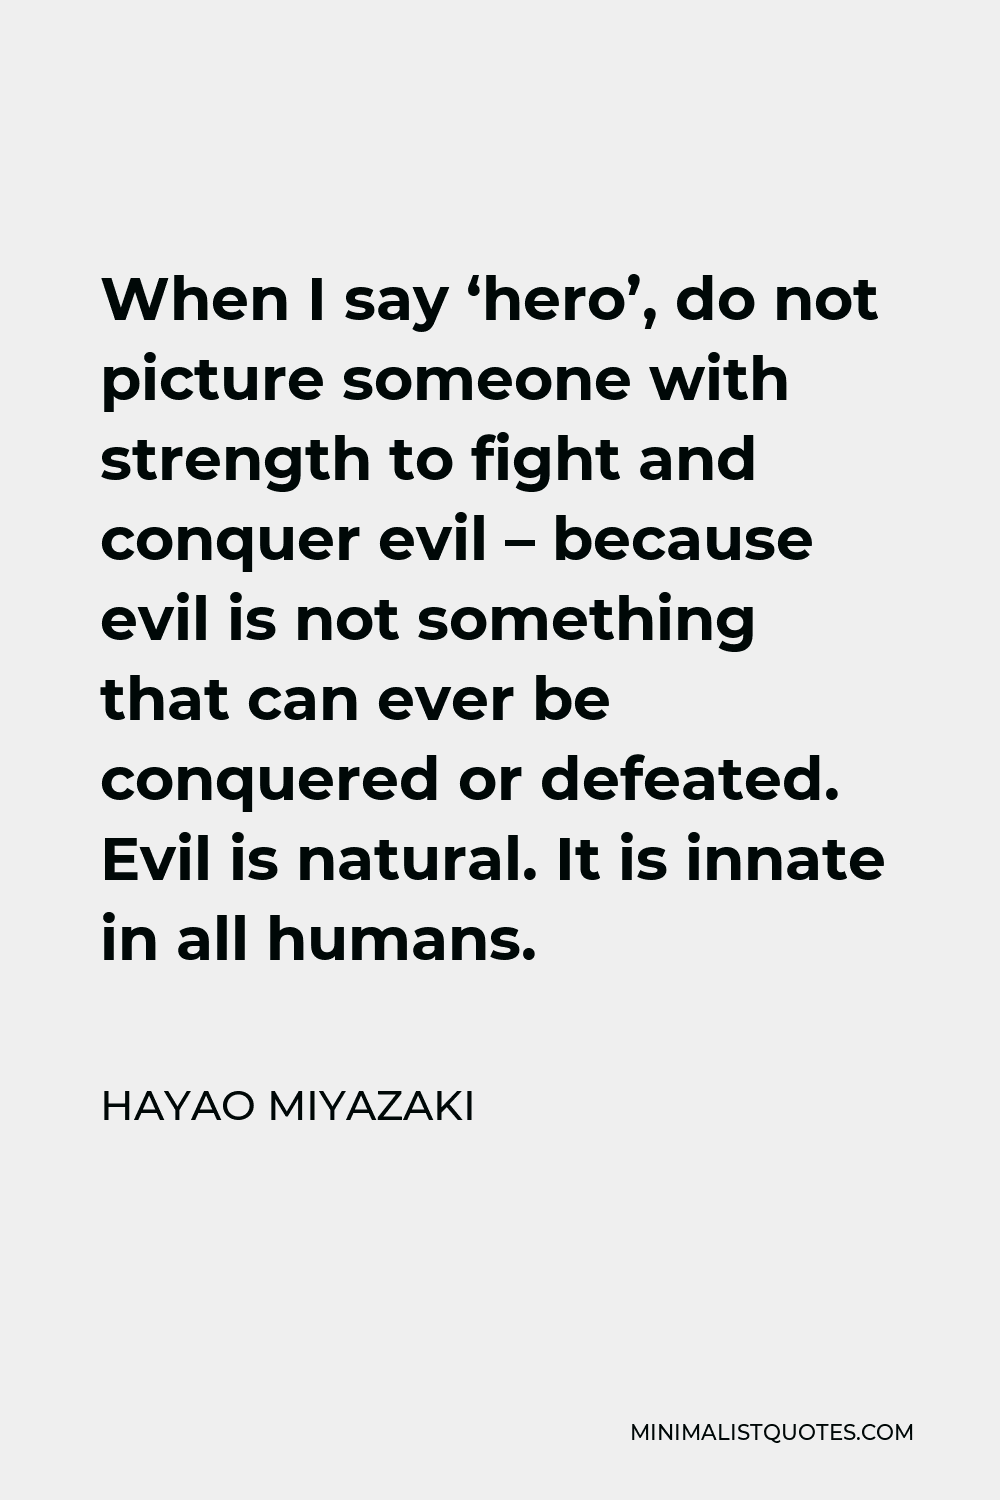 Hayao Miyazaki Quote - When I say ‘hero’, do not picture someone with strength to fight and conquer evil – because evil is not something that can ever be conquered or defeated. Evil is natural. It is innate in all humans.